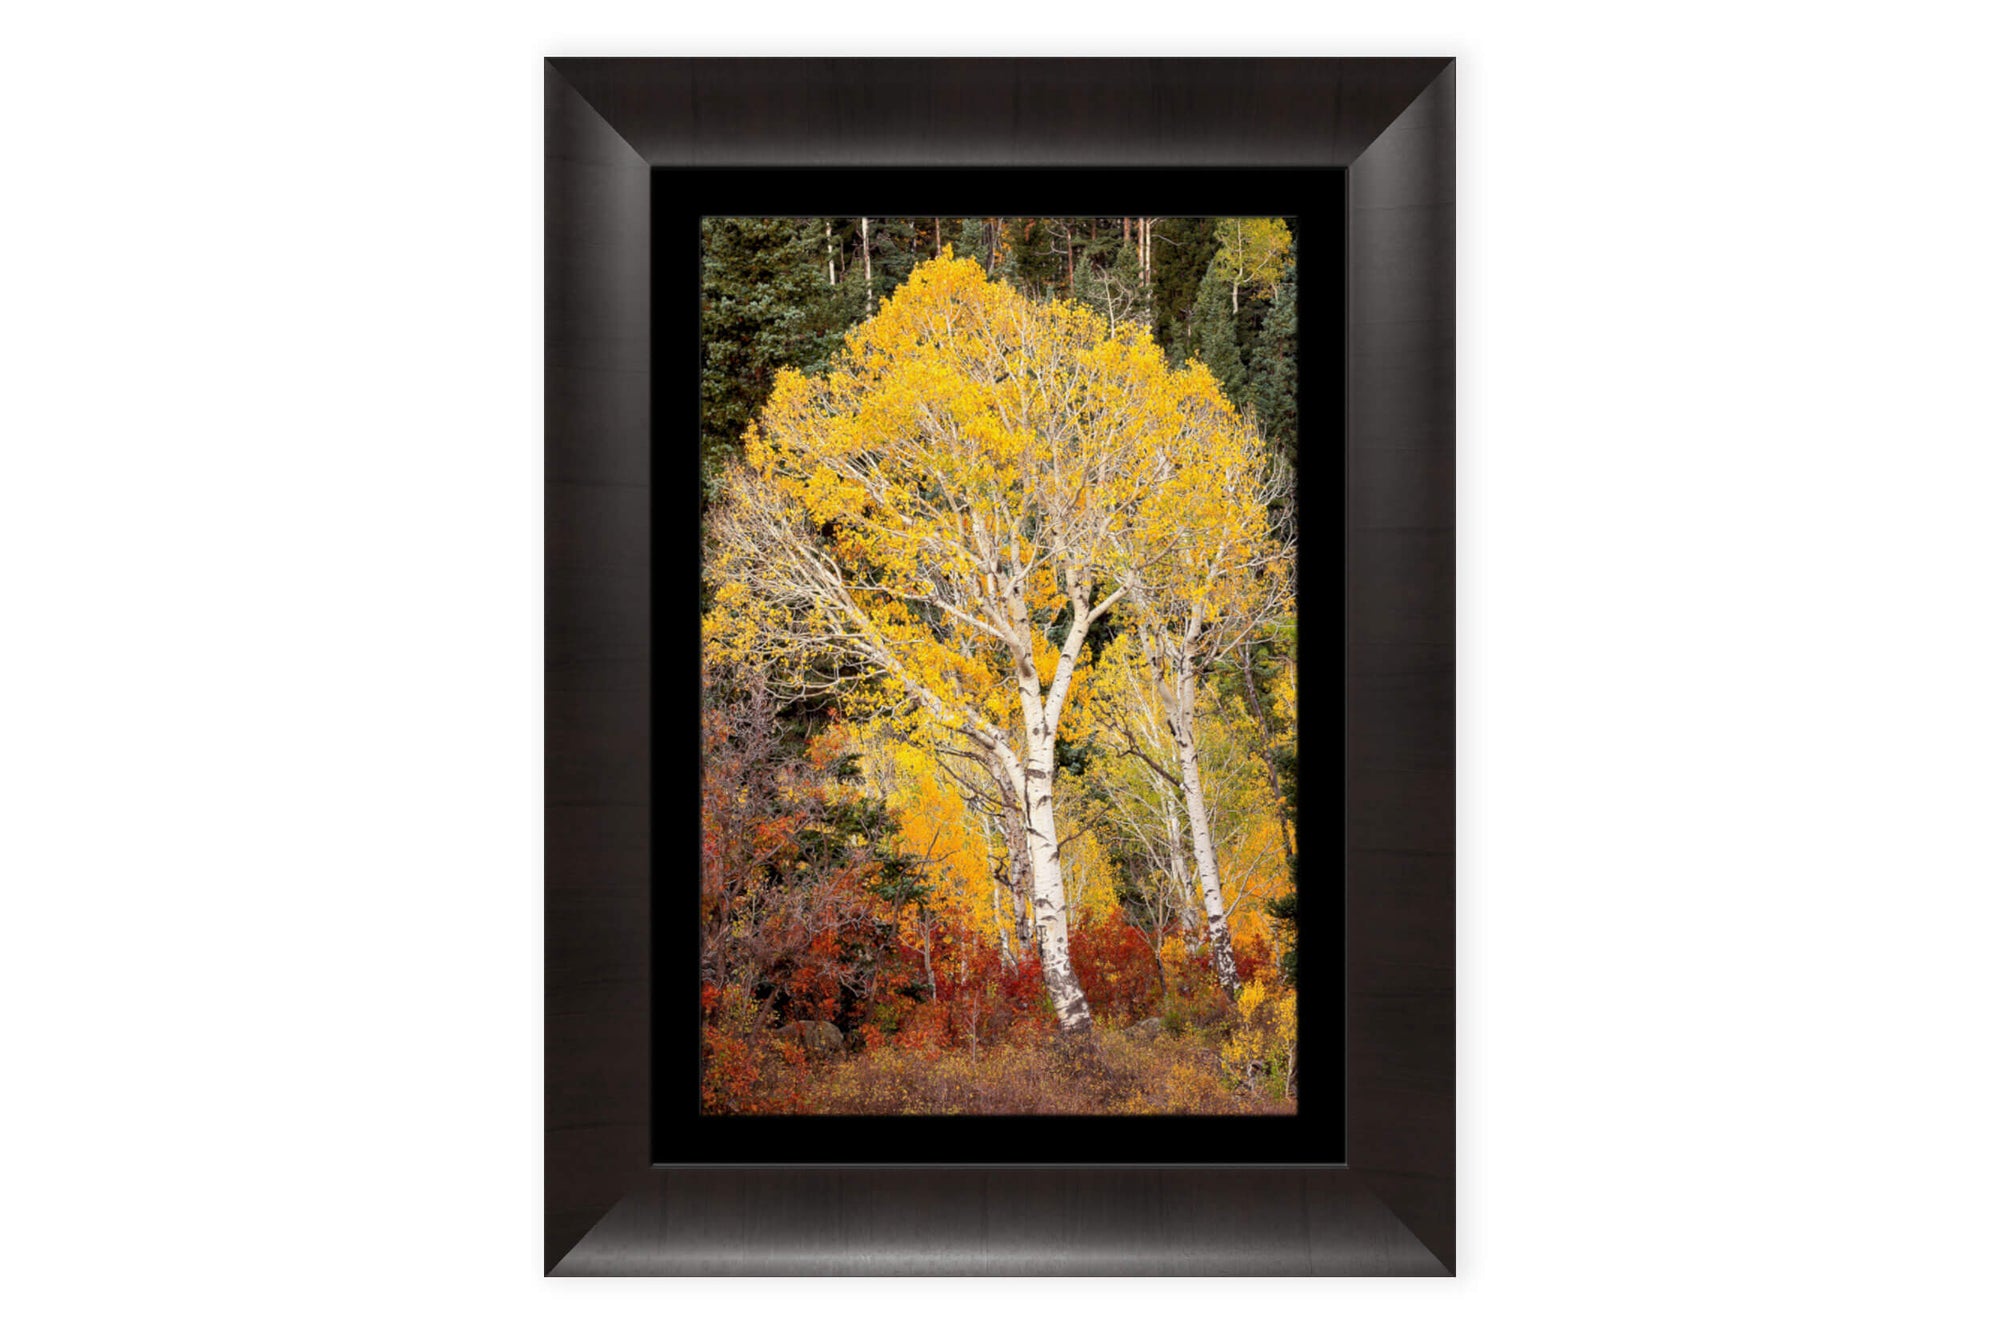 A framed Telluride fall colors picture.